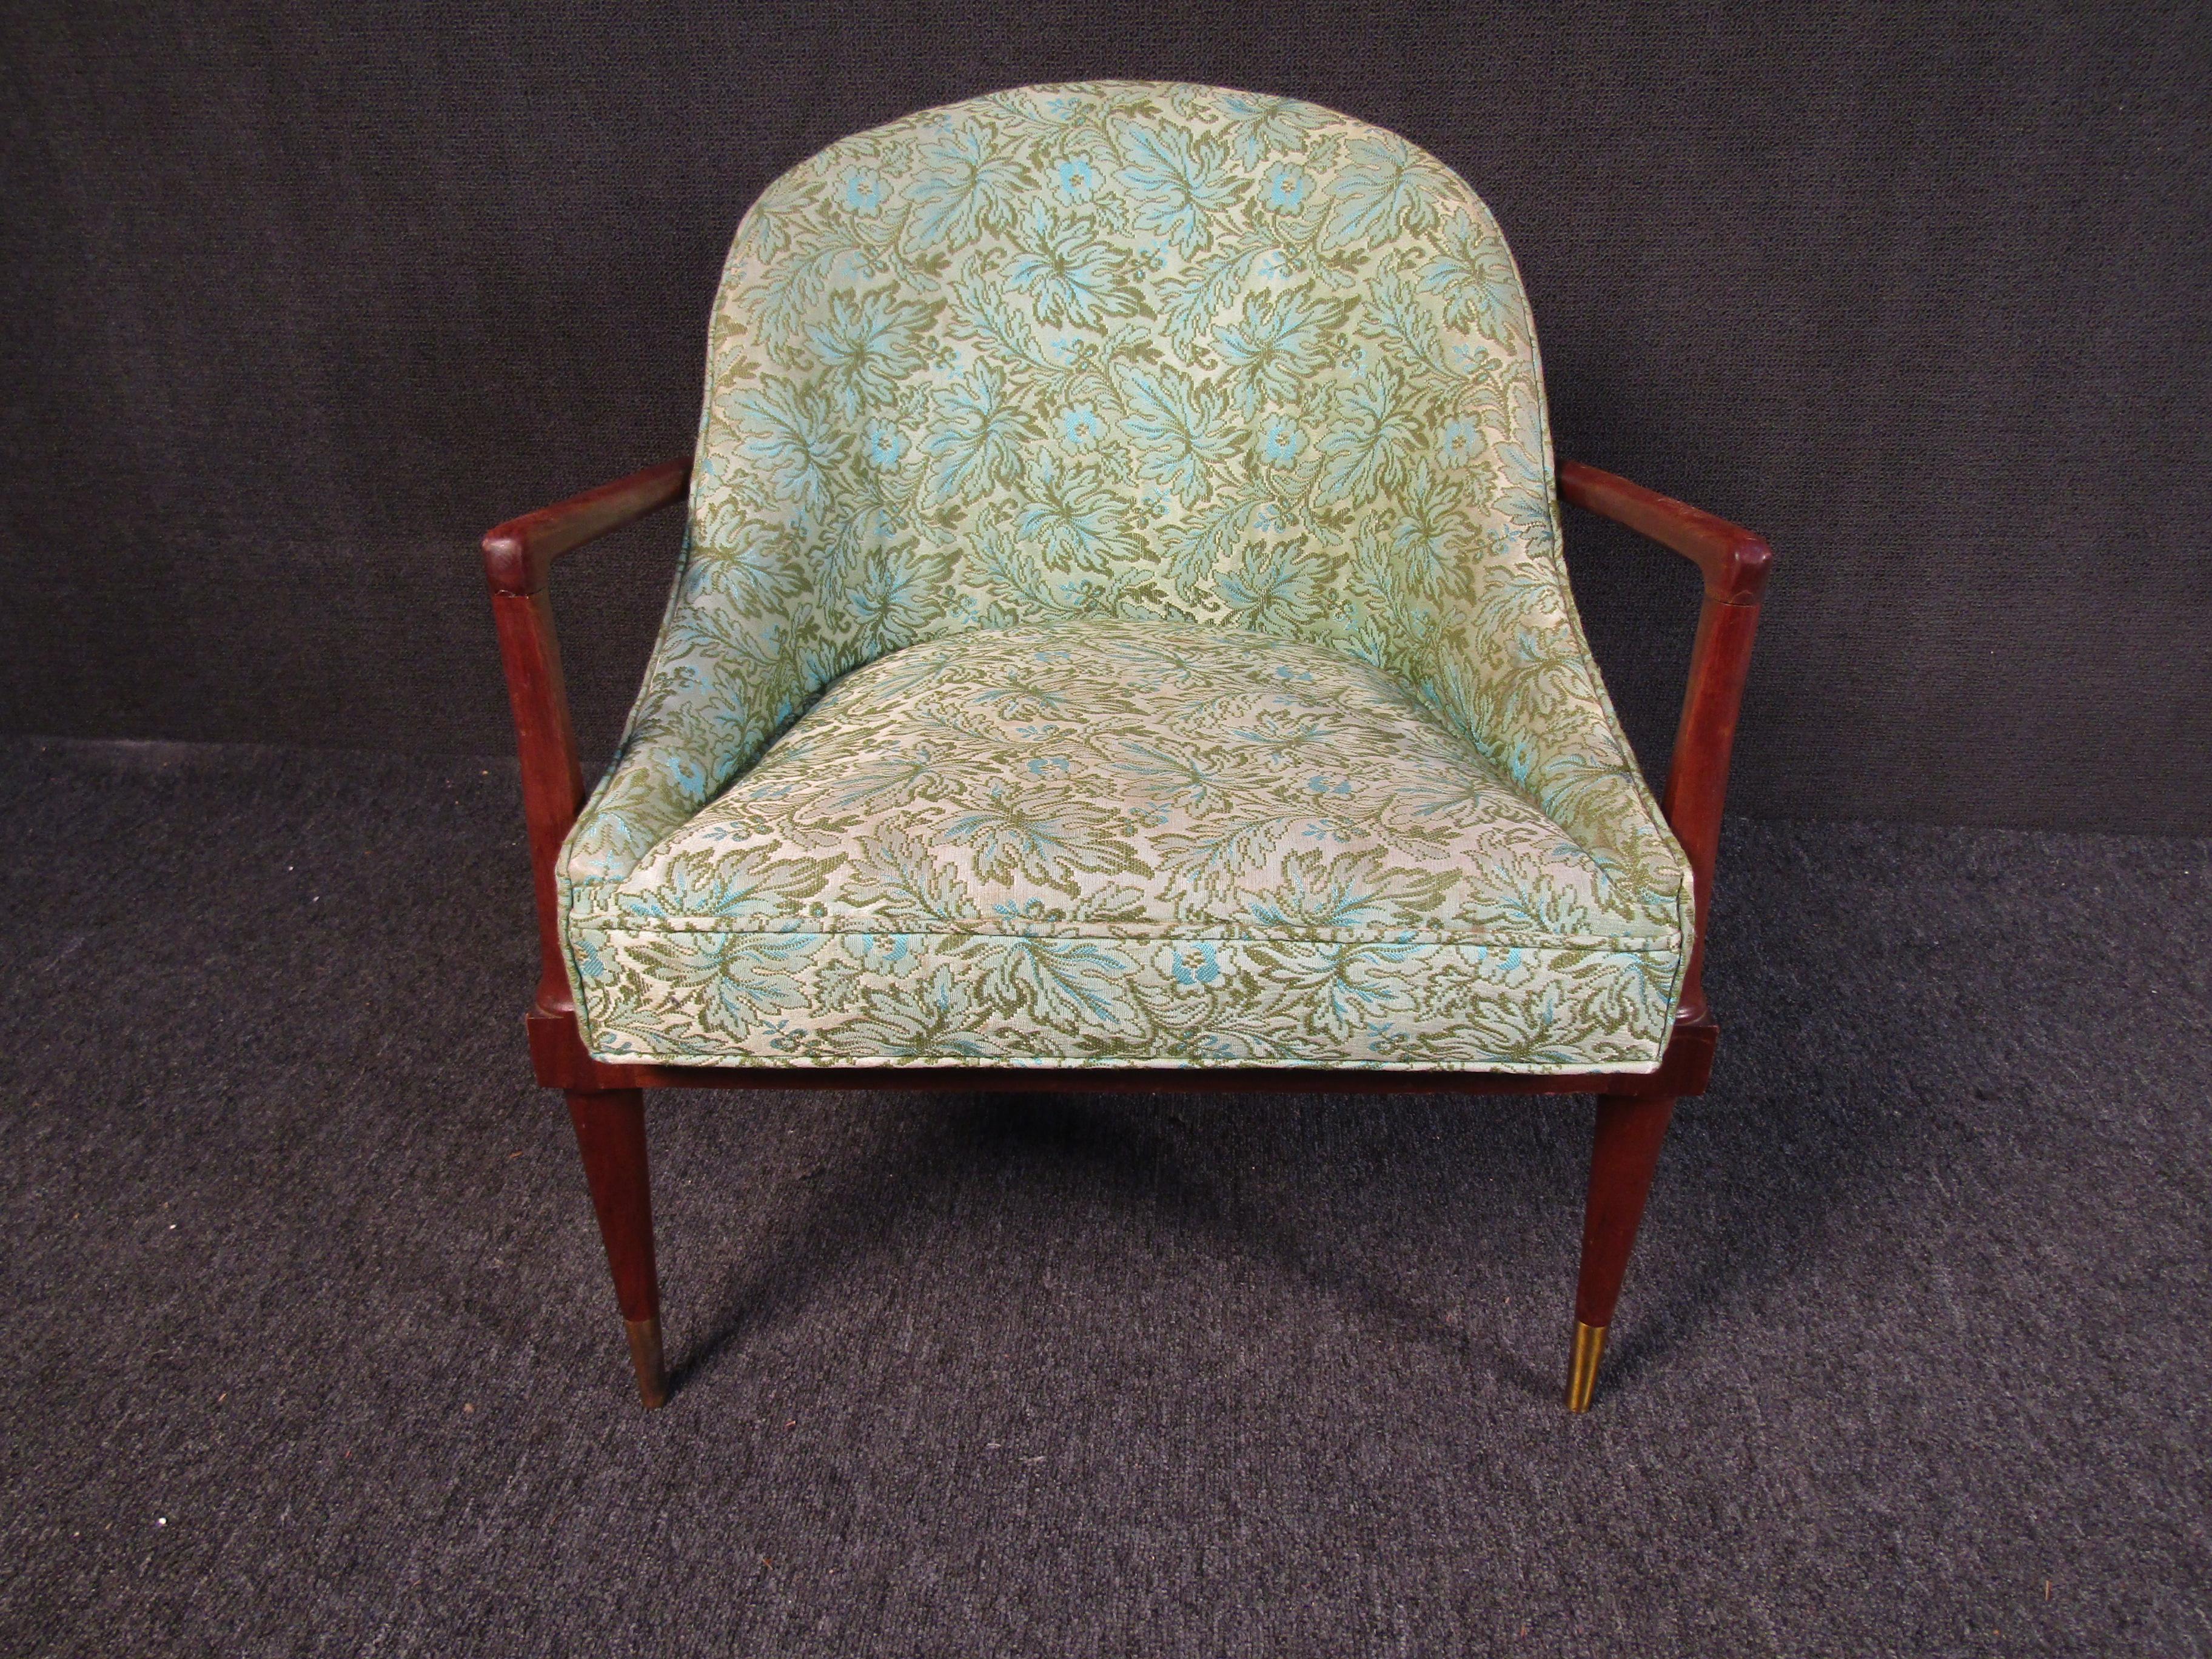 A beautiful Mid-Century Modern armchair with a walnut frame and brass footing caps, this chair features a beautiful combination of materials for a vintage look that is full of character. Please confirm item location with seller (NY/NJ).